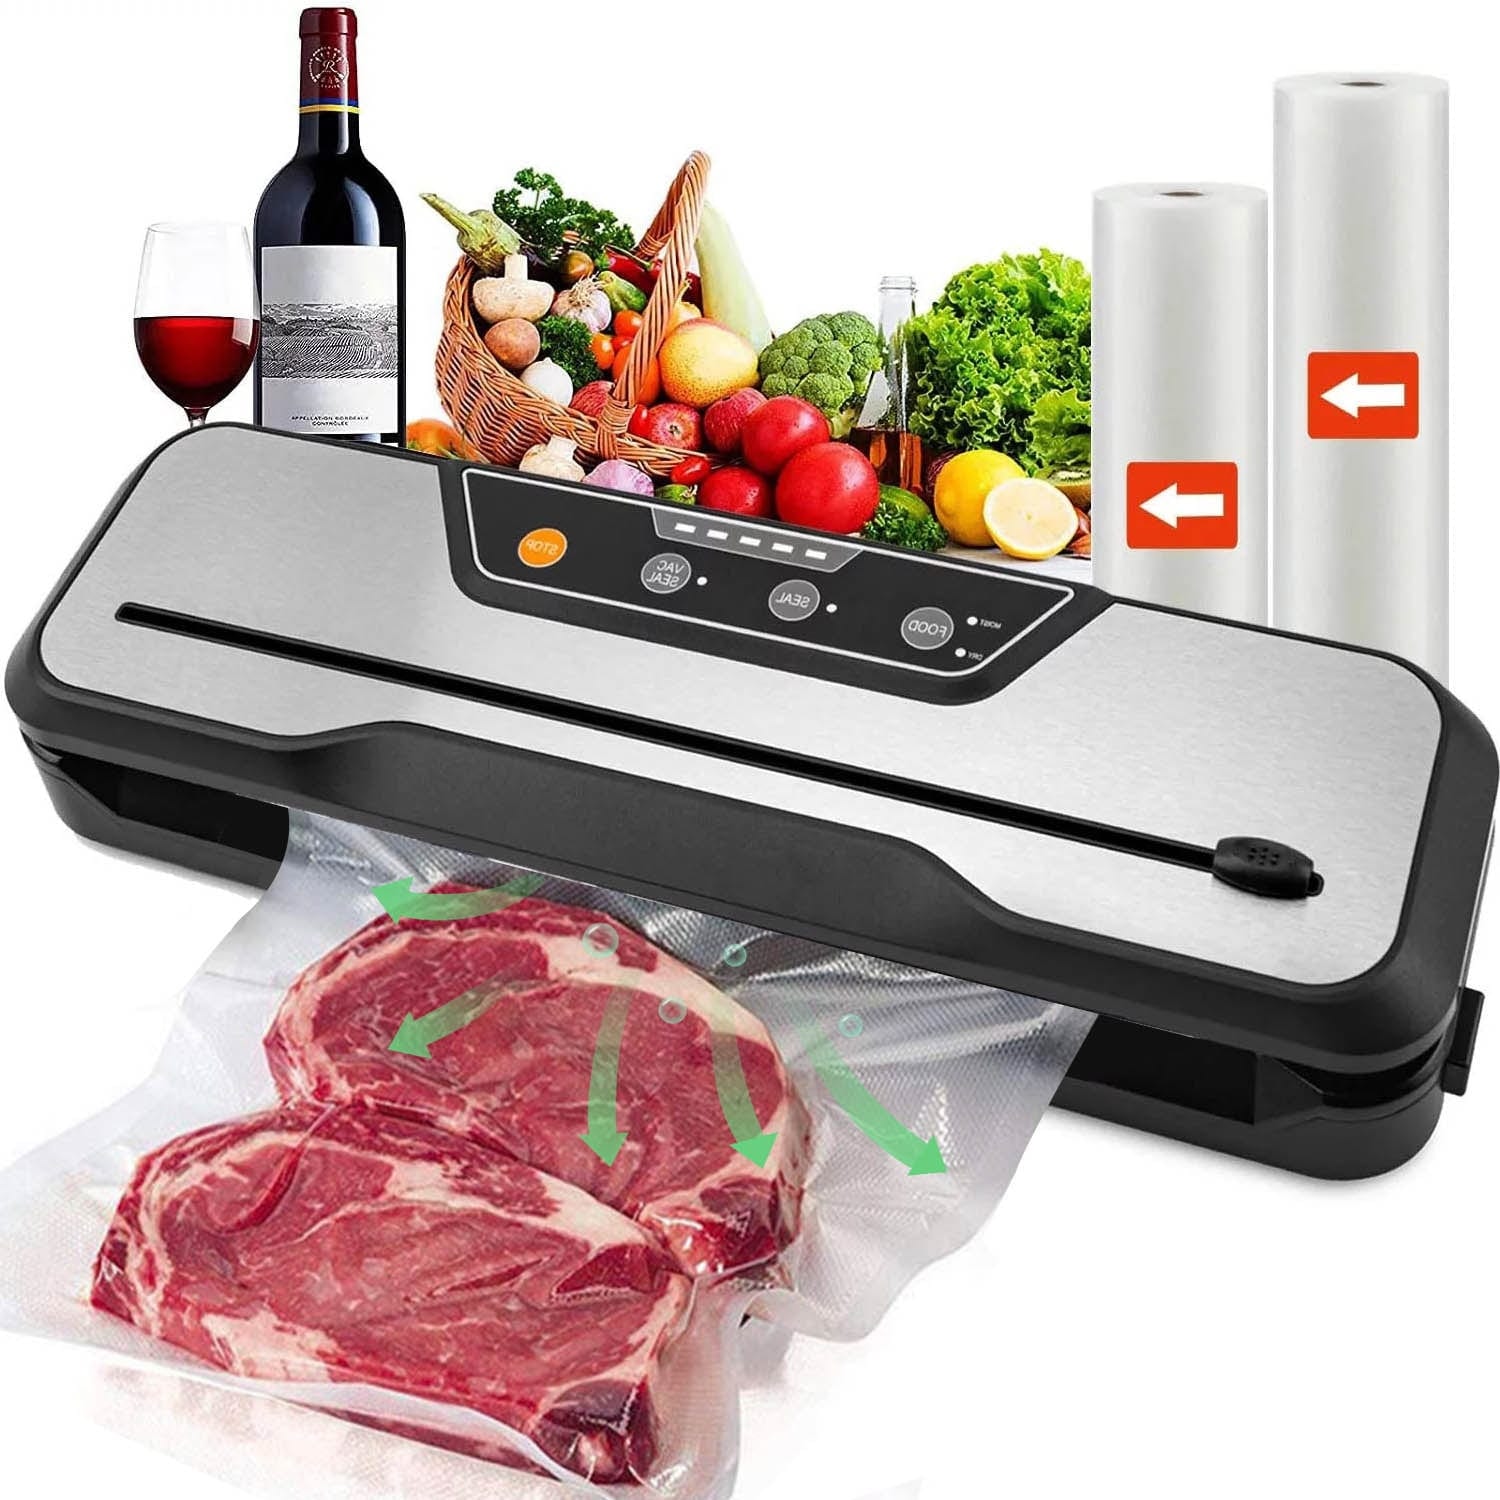 https://ak1.ostkcdn.com/images/products/is/images/direct/4fba717ed493466905cc6e1745bd7ffed8d7b183/Food-Vacuum-Sealer-Machine-%2C-Automatic-Food-Sealer-with-2-Rolls-Food-Vacuum-Sealer-Bags.jpg